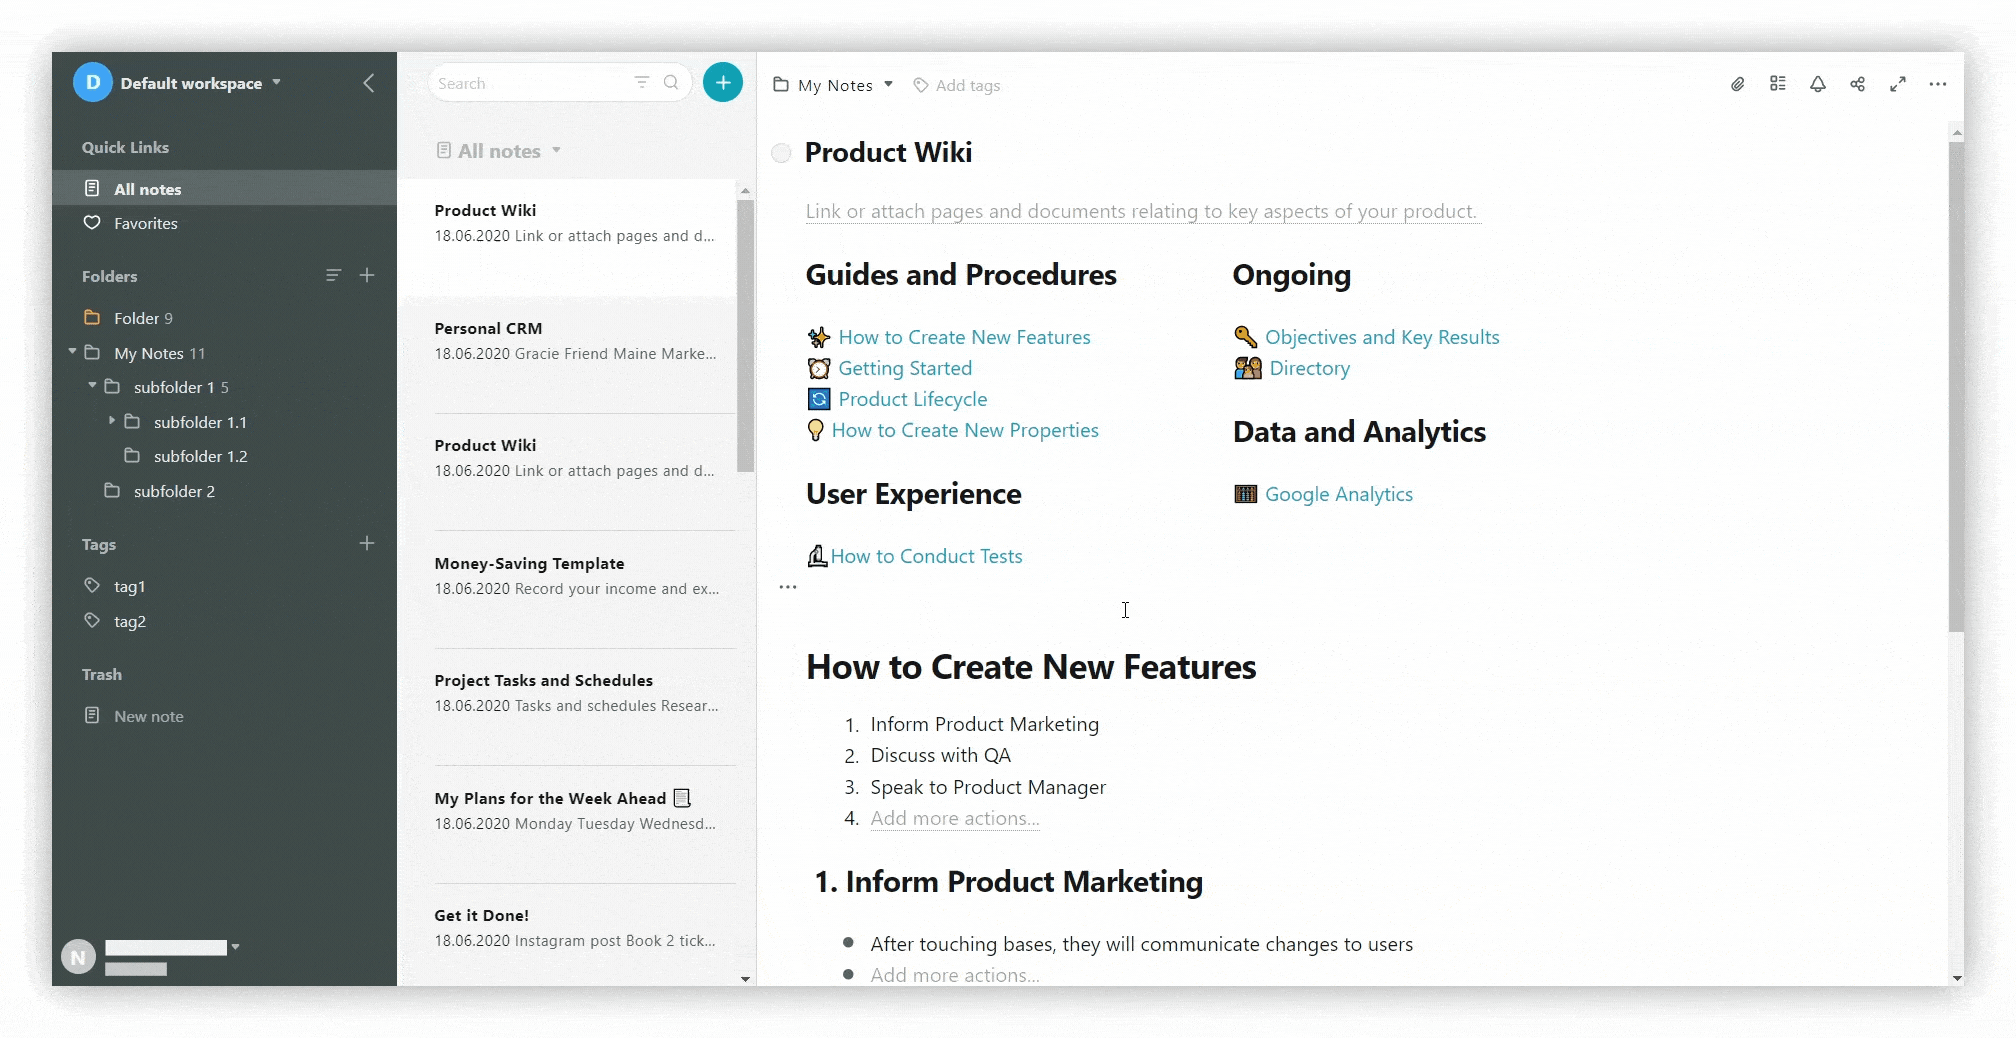 Collapse folders, move pages & folders